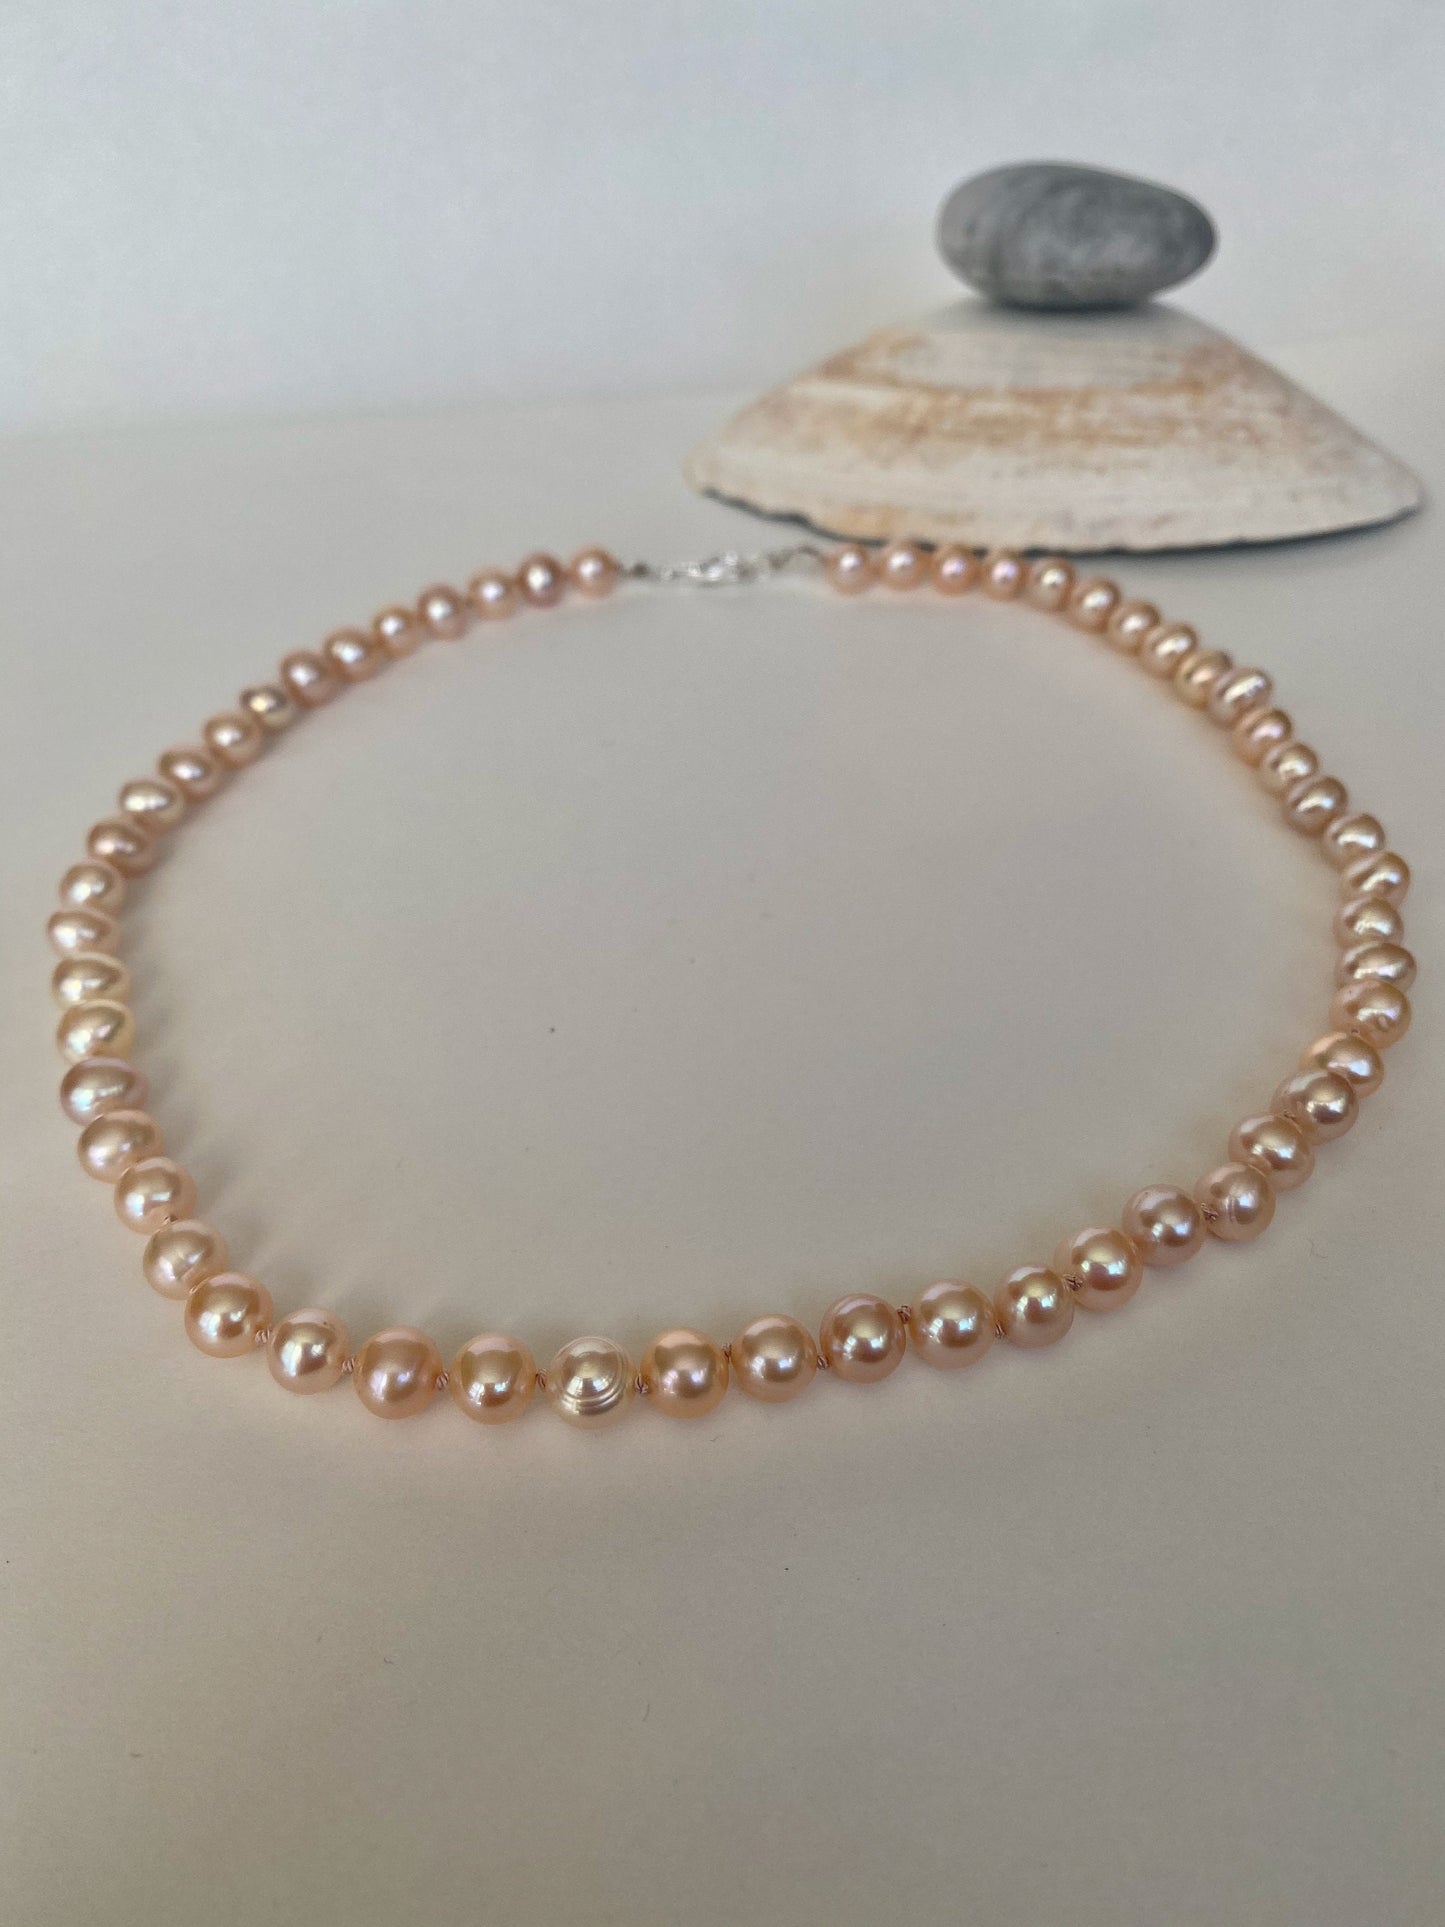 Pearls. Beautiful soft pink knotted fresh water pearl necklace. The necklace is finished with a quality sterling silver lobster clasp.